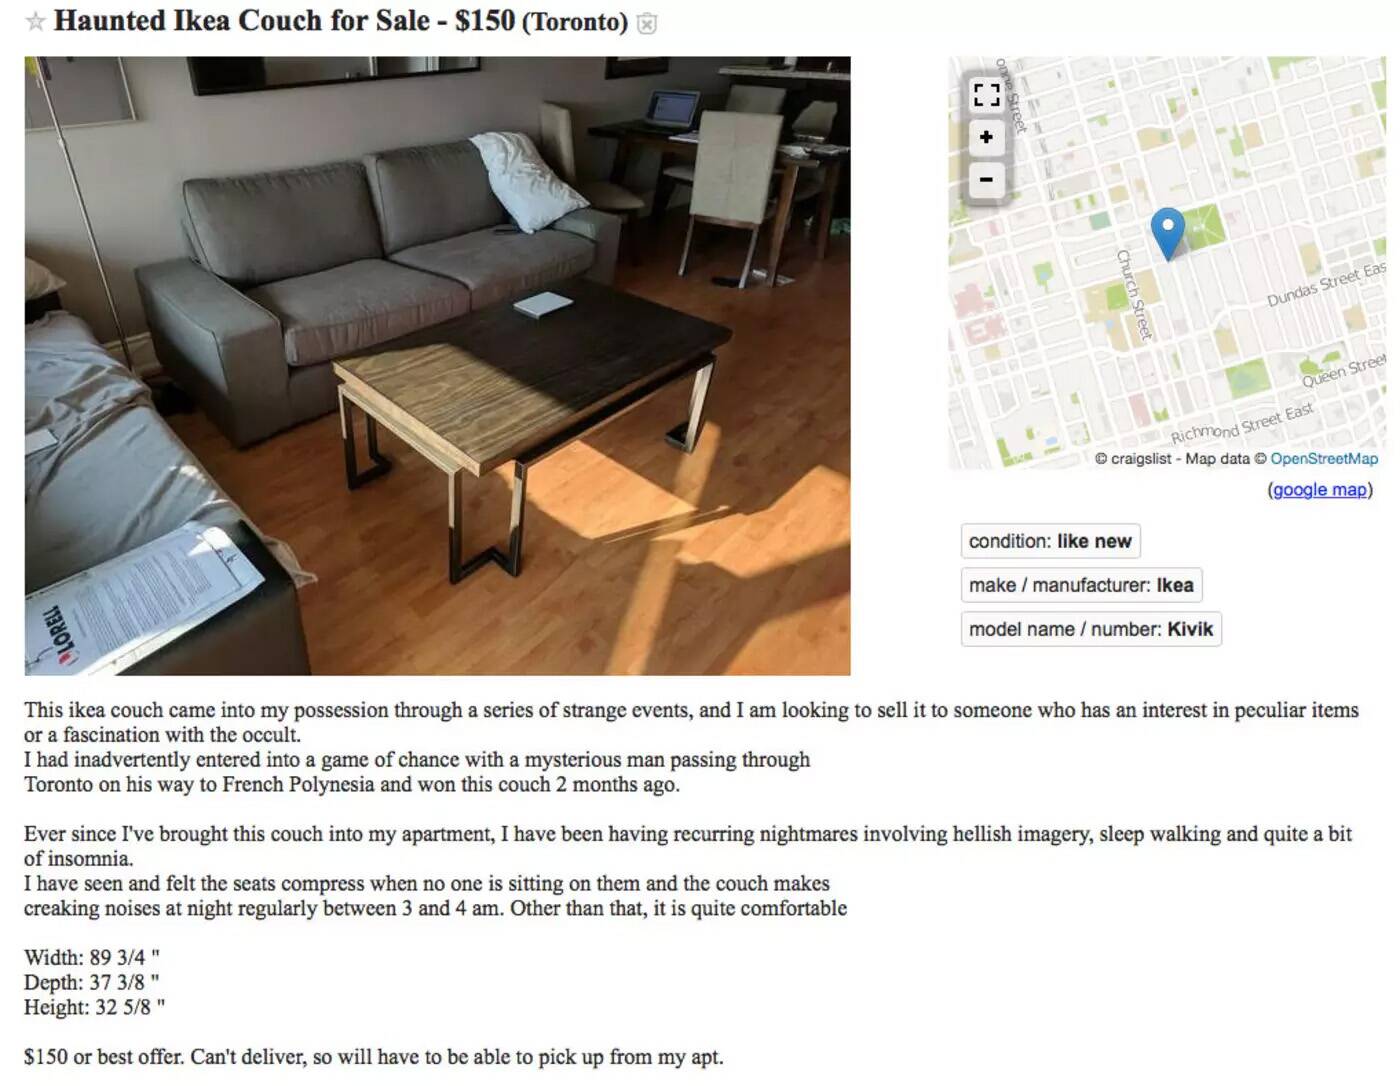 ikea couch haunted